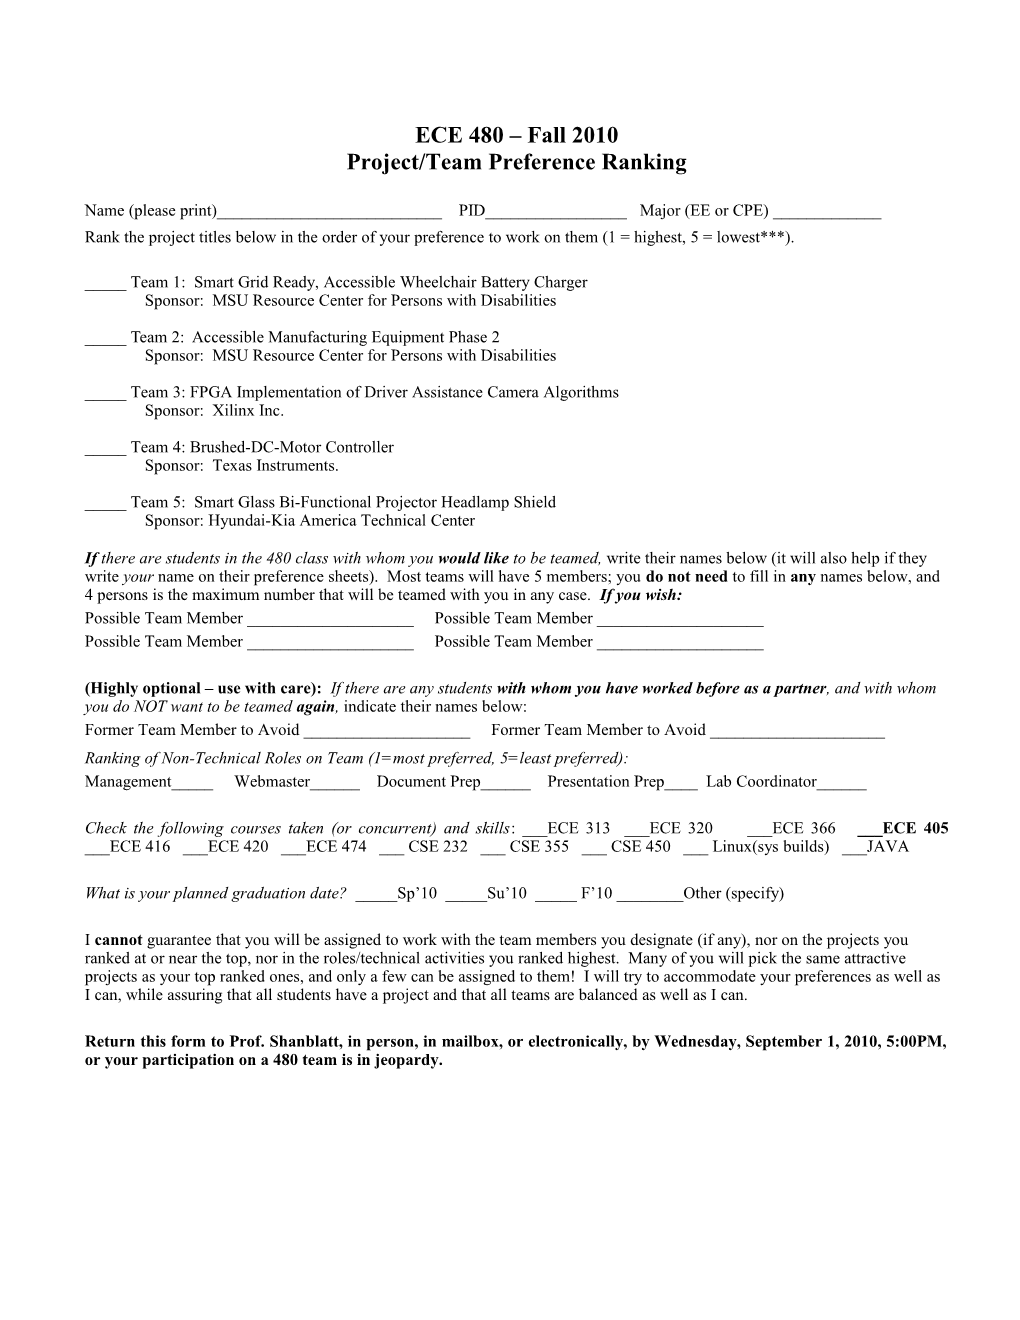 ECE 480 Project Preference Ranking Form